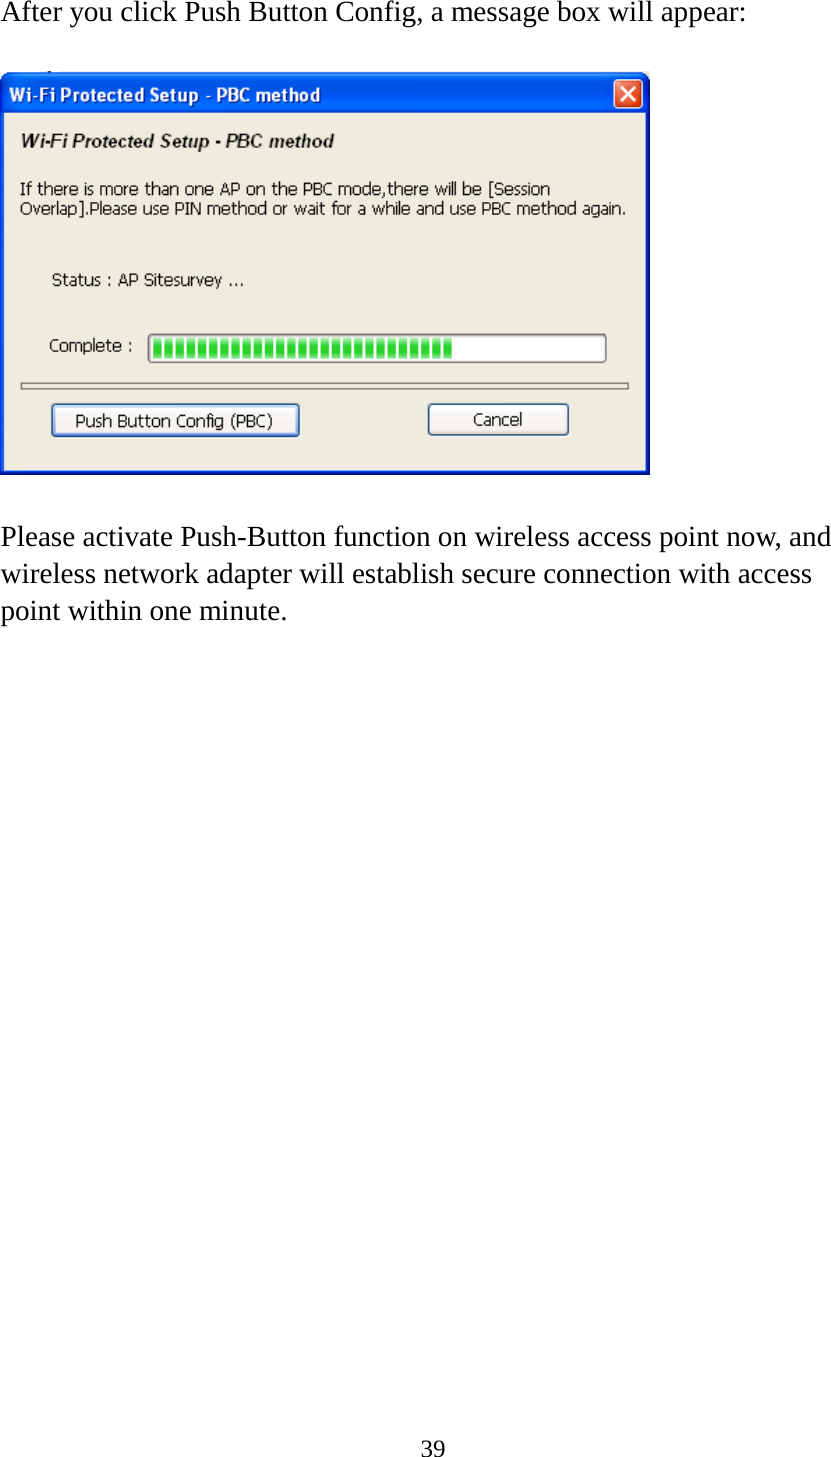 39  After you click Push Button Config, a message box will appear:    Please activate Push-Button function on wireless access point now, and wireless network adapter will establish secure connection with access point within one minute.  